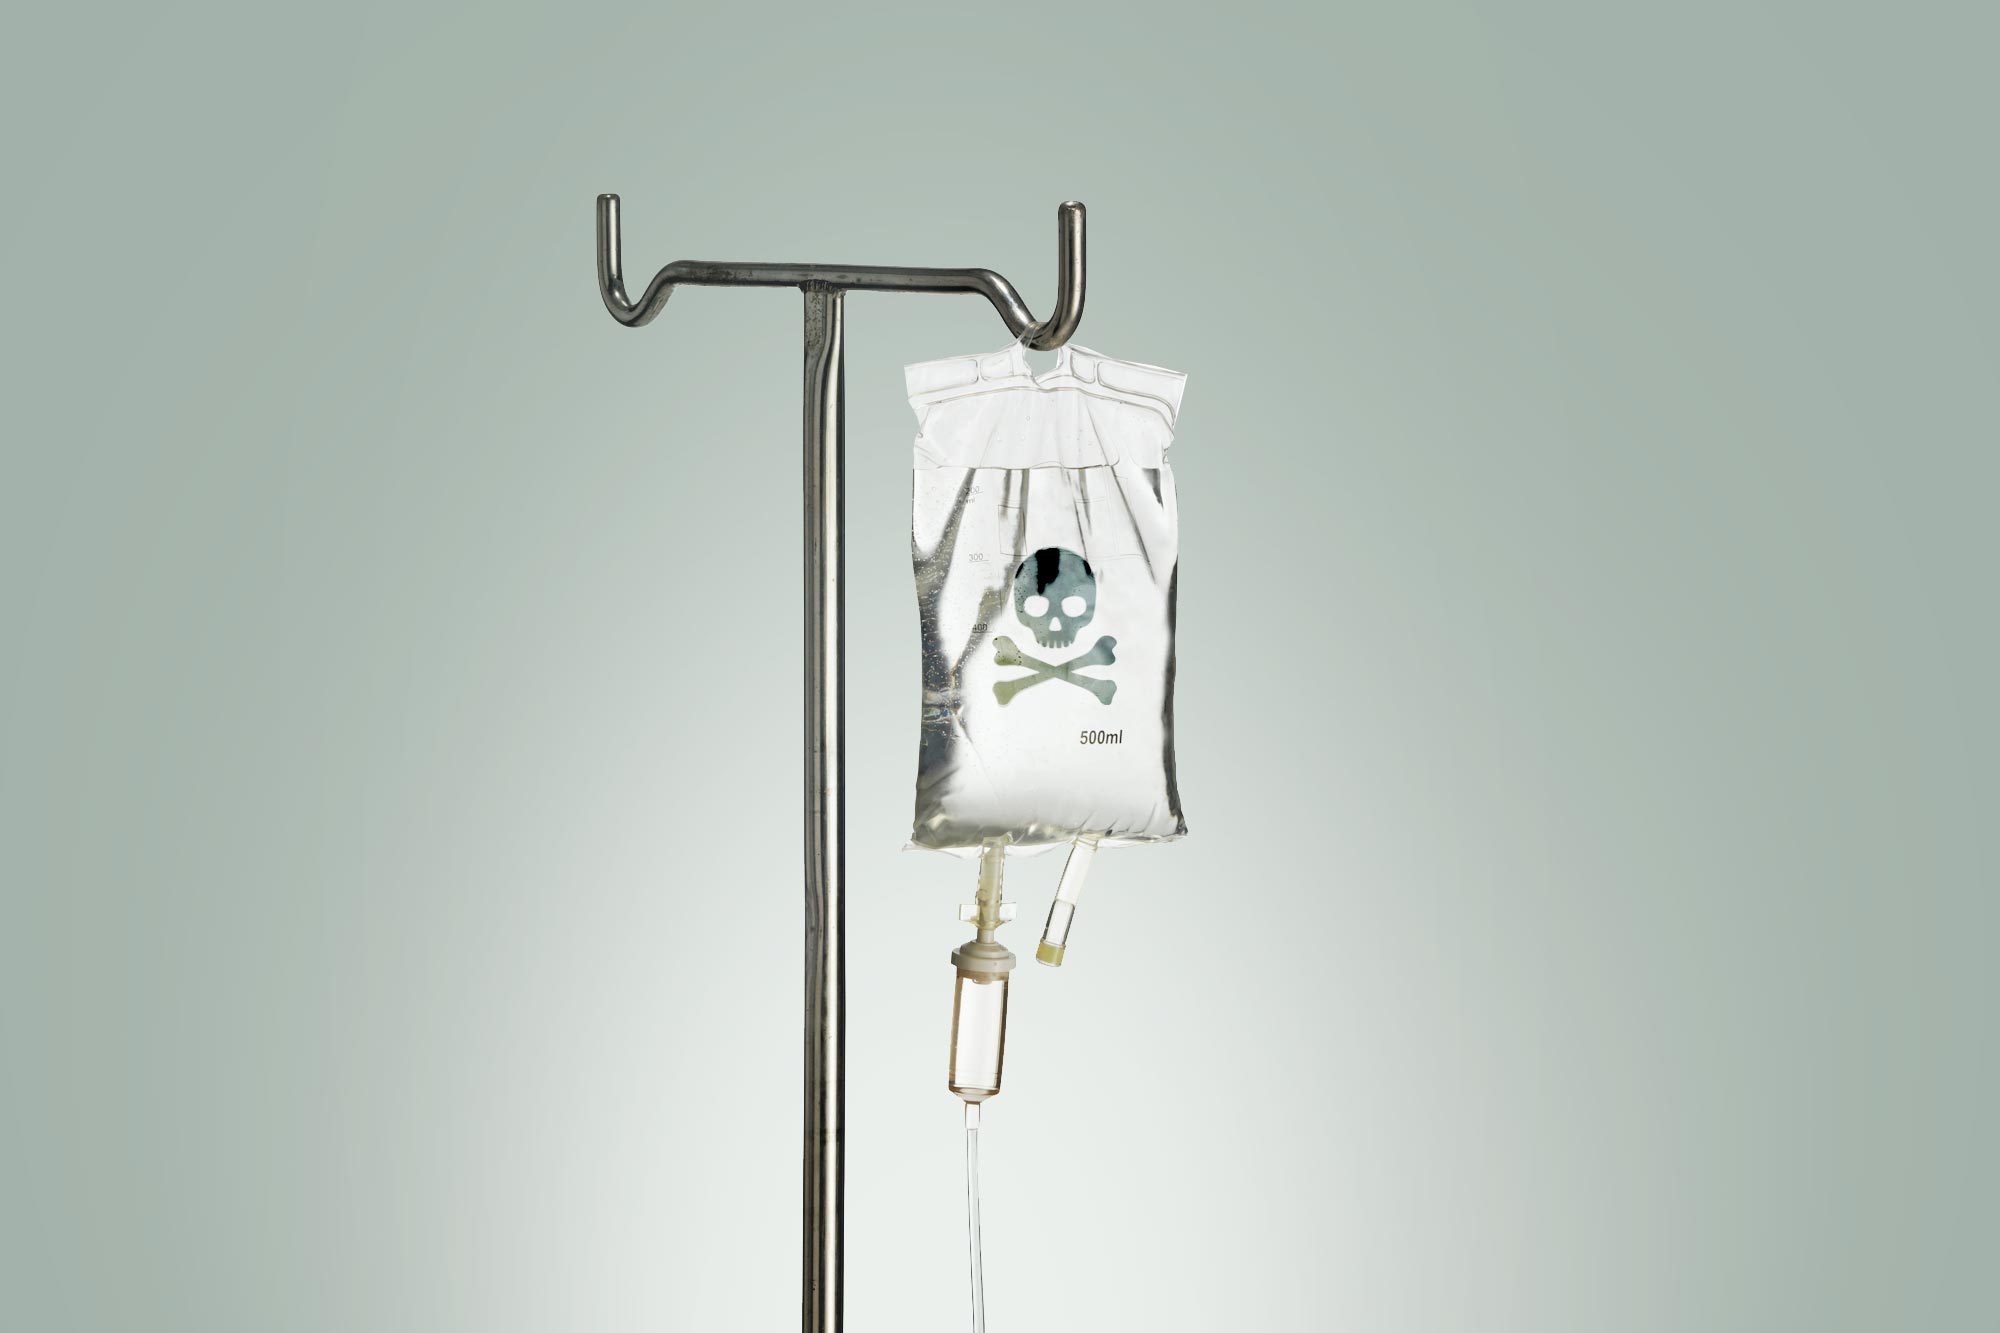 An IV bag with a skull and crossbones on it is pictured against a stark background.